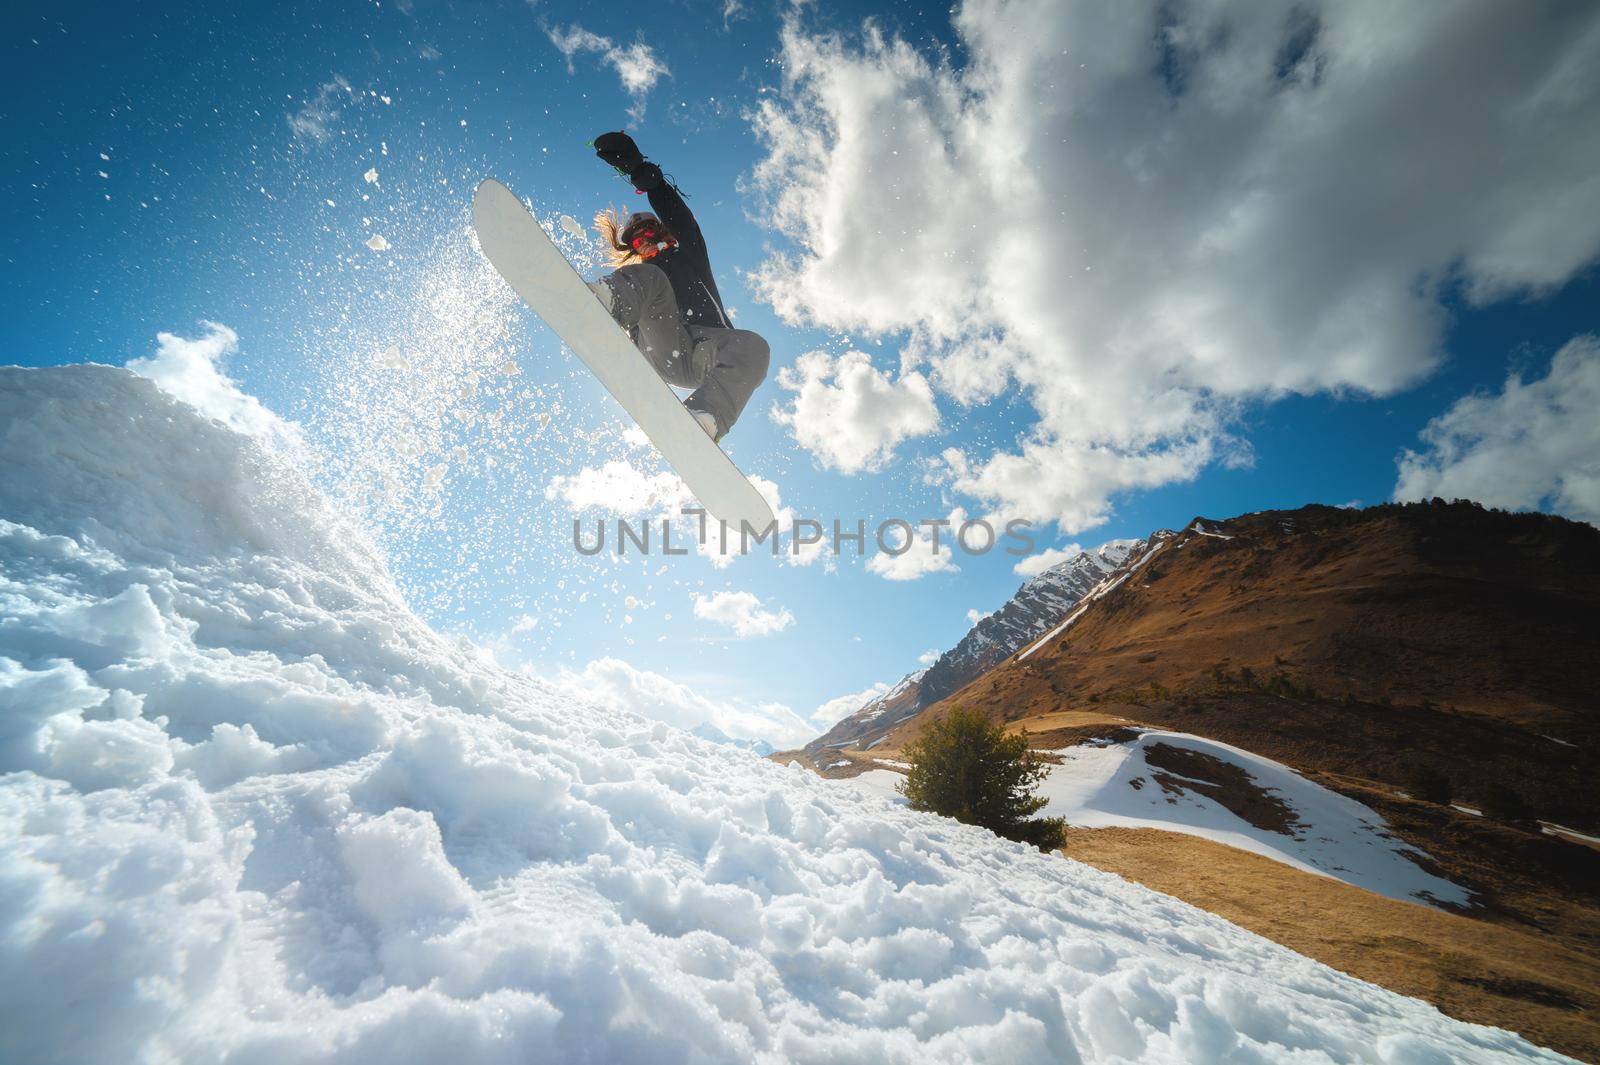 Extreme winter sports. Young professional woman snowboarder rides a halfpipe. Jumps from a halfpipe trampoline in the sun, performs tricks and turns with grabs in a sunny winter.